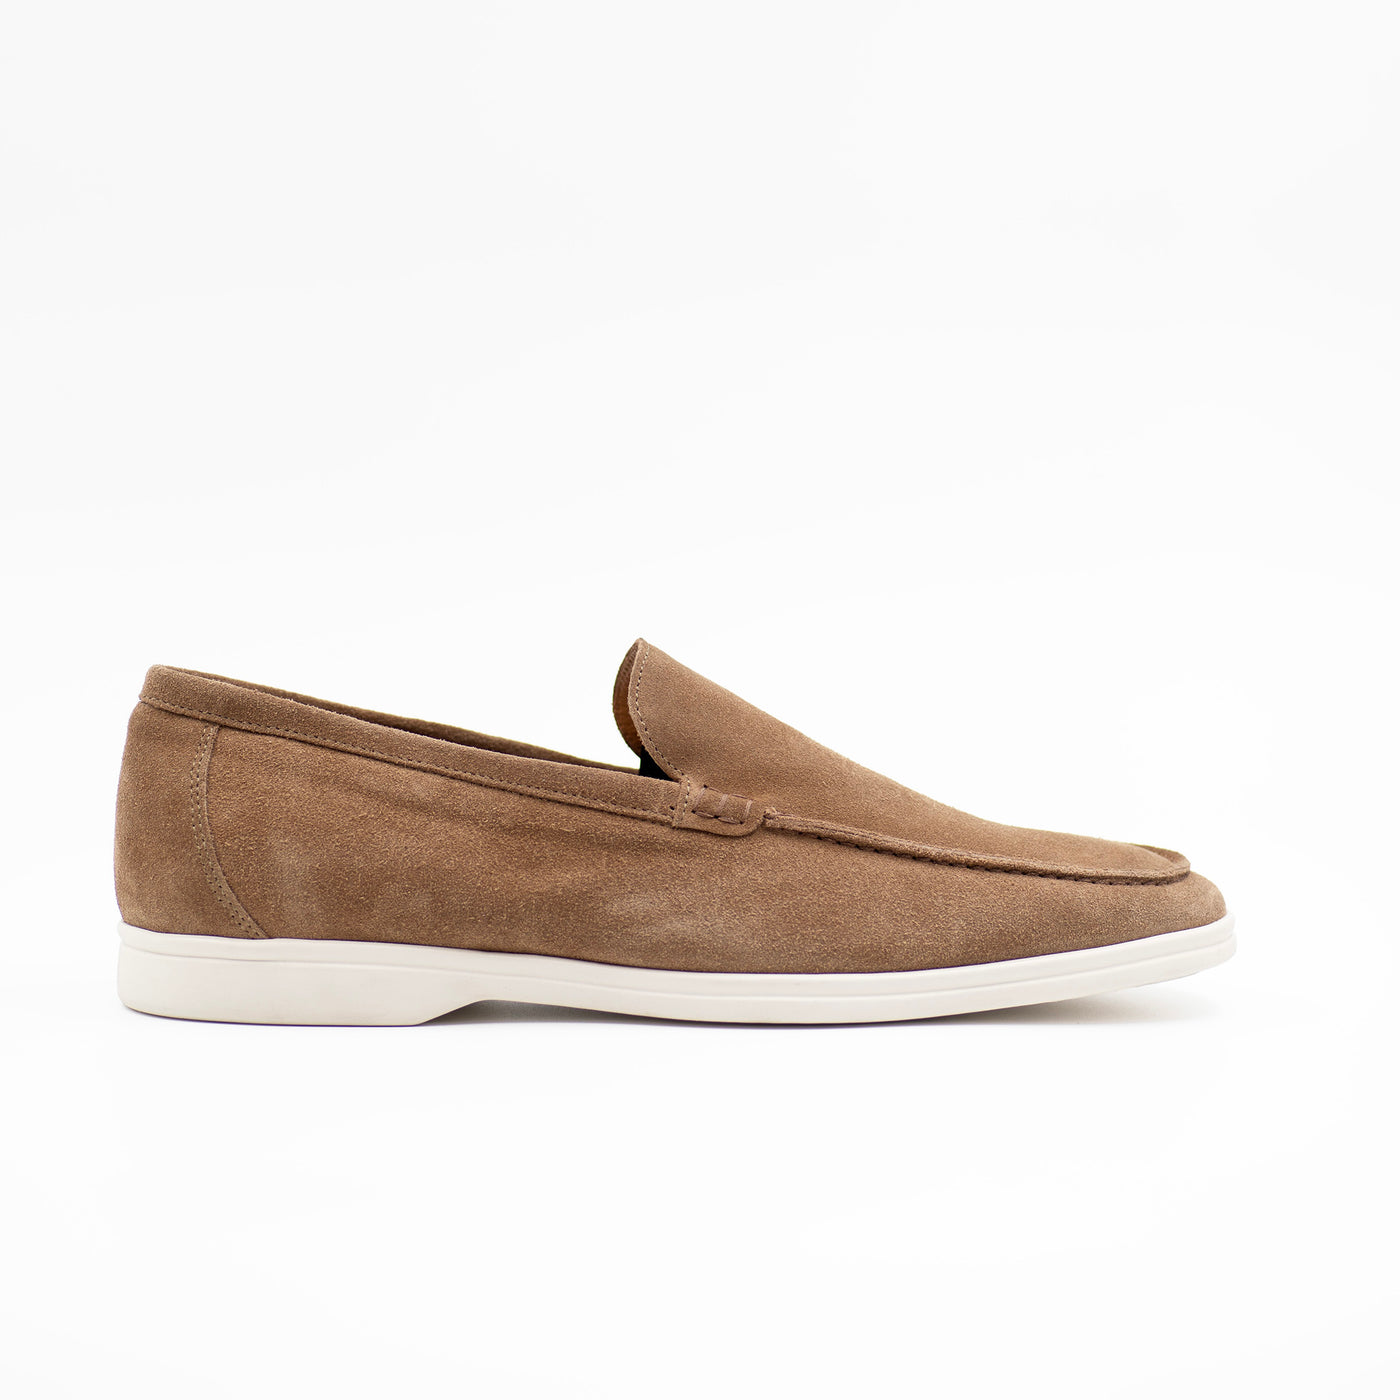 Summer Loafers in Light Brown